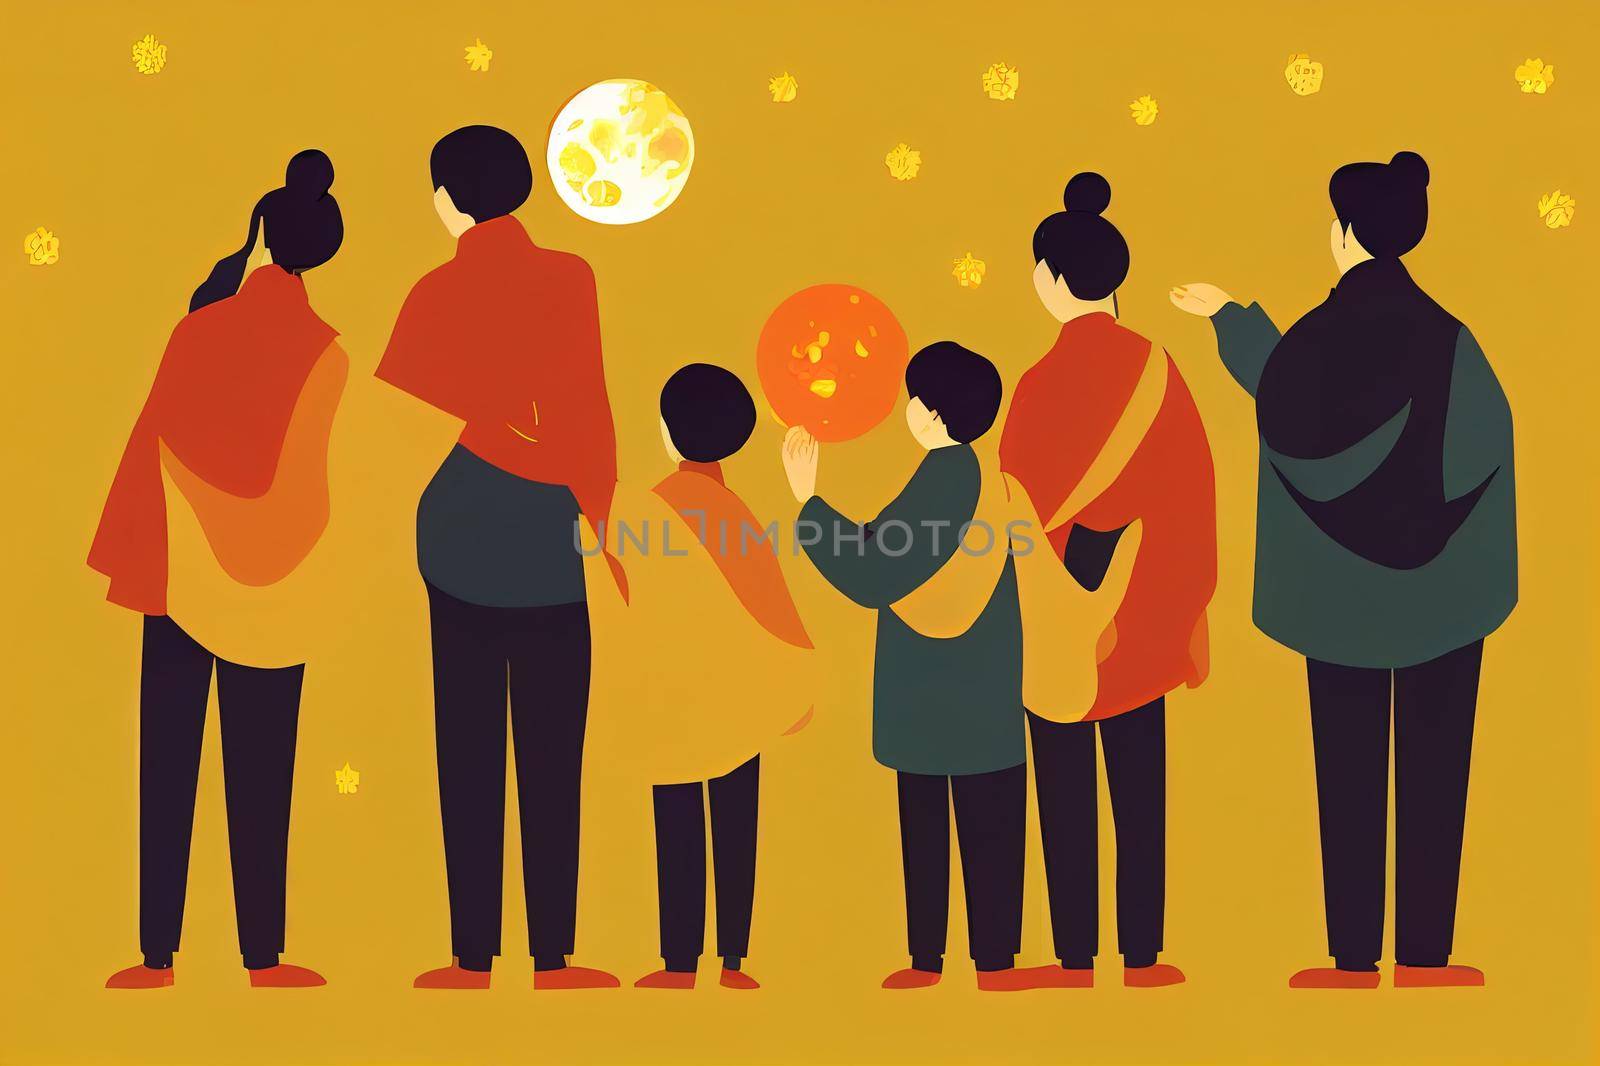 Mid autumn festival design Flat illustration of Chinese family having reunion eating mooncakes and watching moon as holiday celebrations